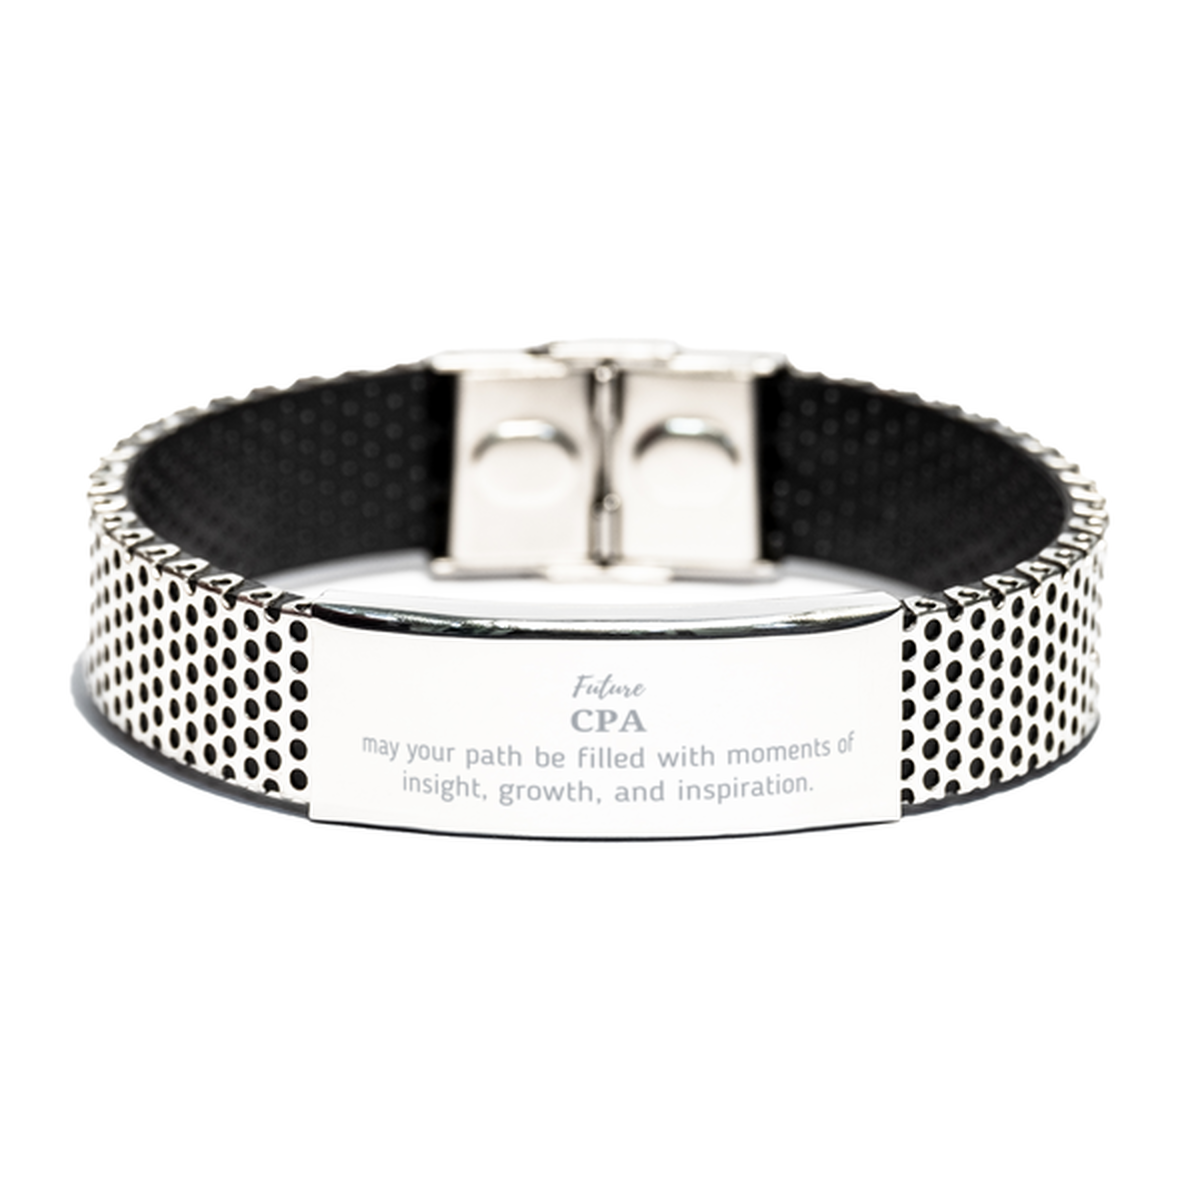 Future CPA Gifts, May your path be filled with moments of insight, Graduation Gifts for New CPA, Christmas Unique Stainless Steel Bracelet For Men, Women, Friends